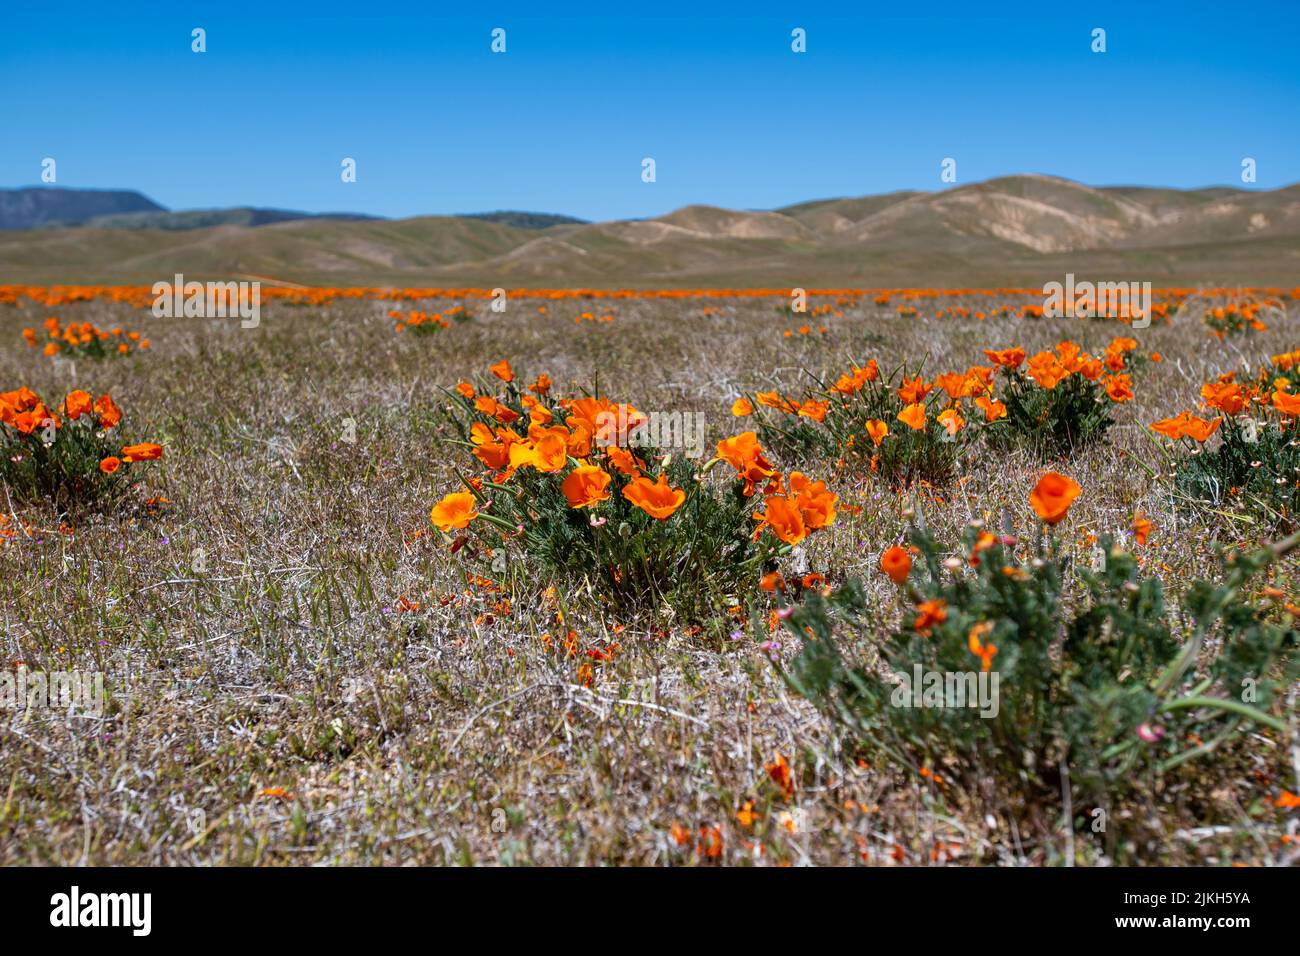 A scenic view of orange California poppy flowers on a field in sunny weather Stock Photo